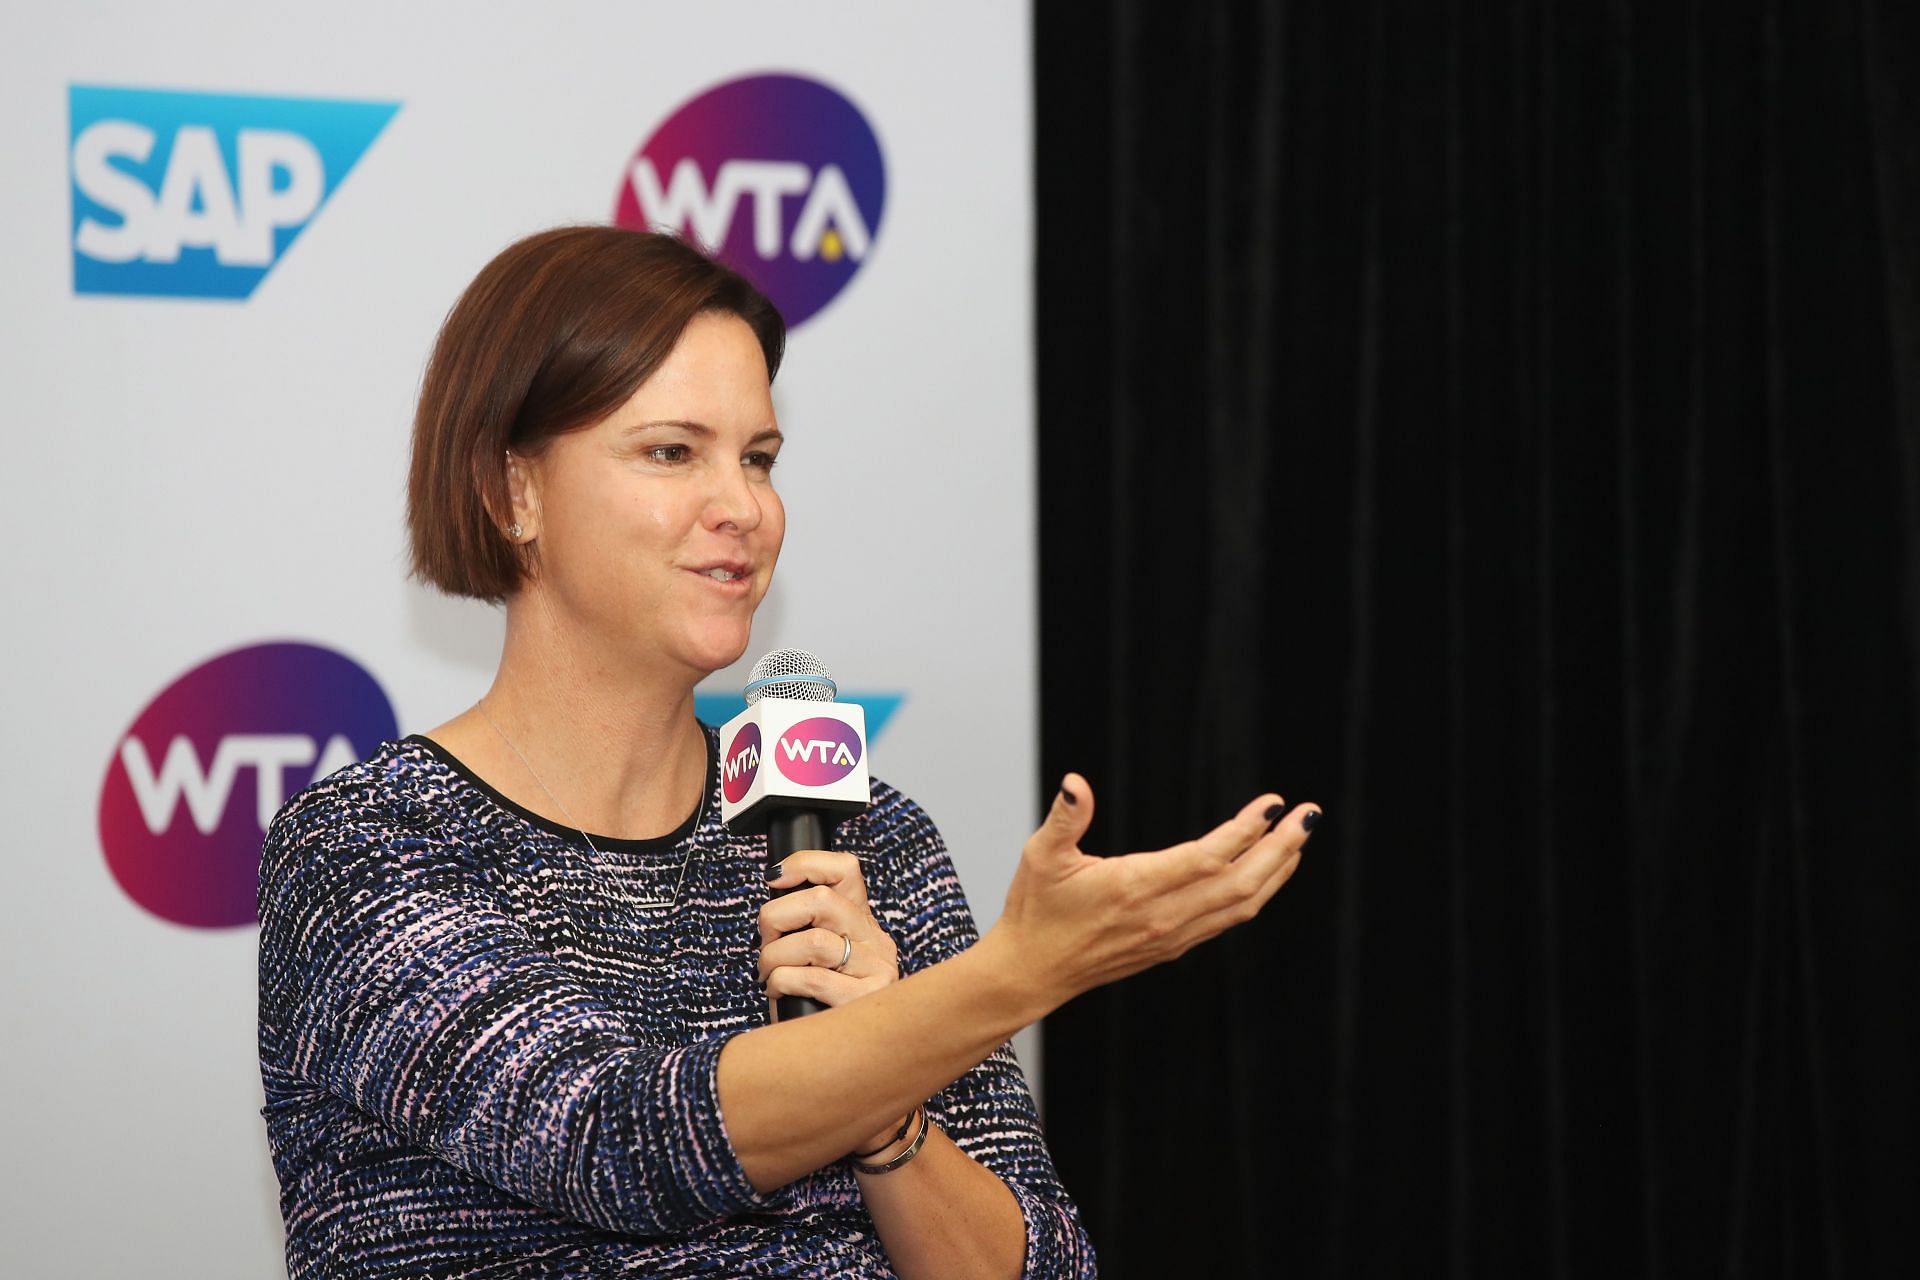 Lindsay Davenport pictured during the 2017 BNP Paribas WTA Finals in Singapore.